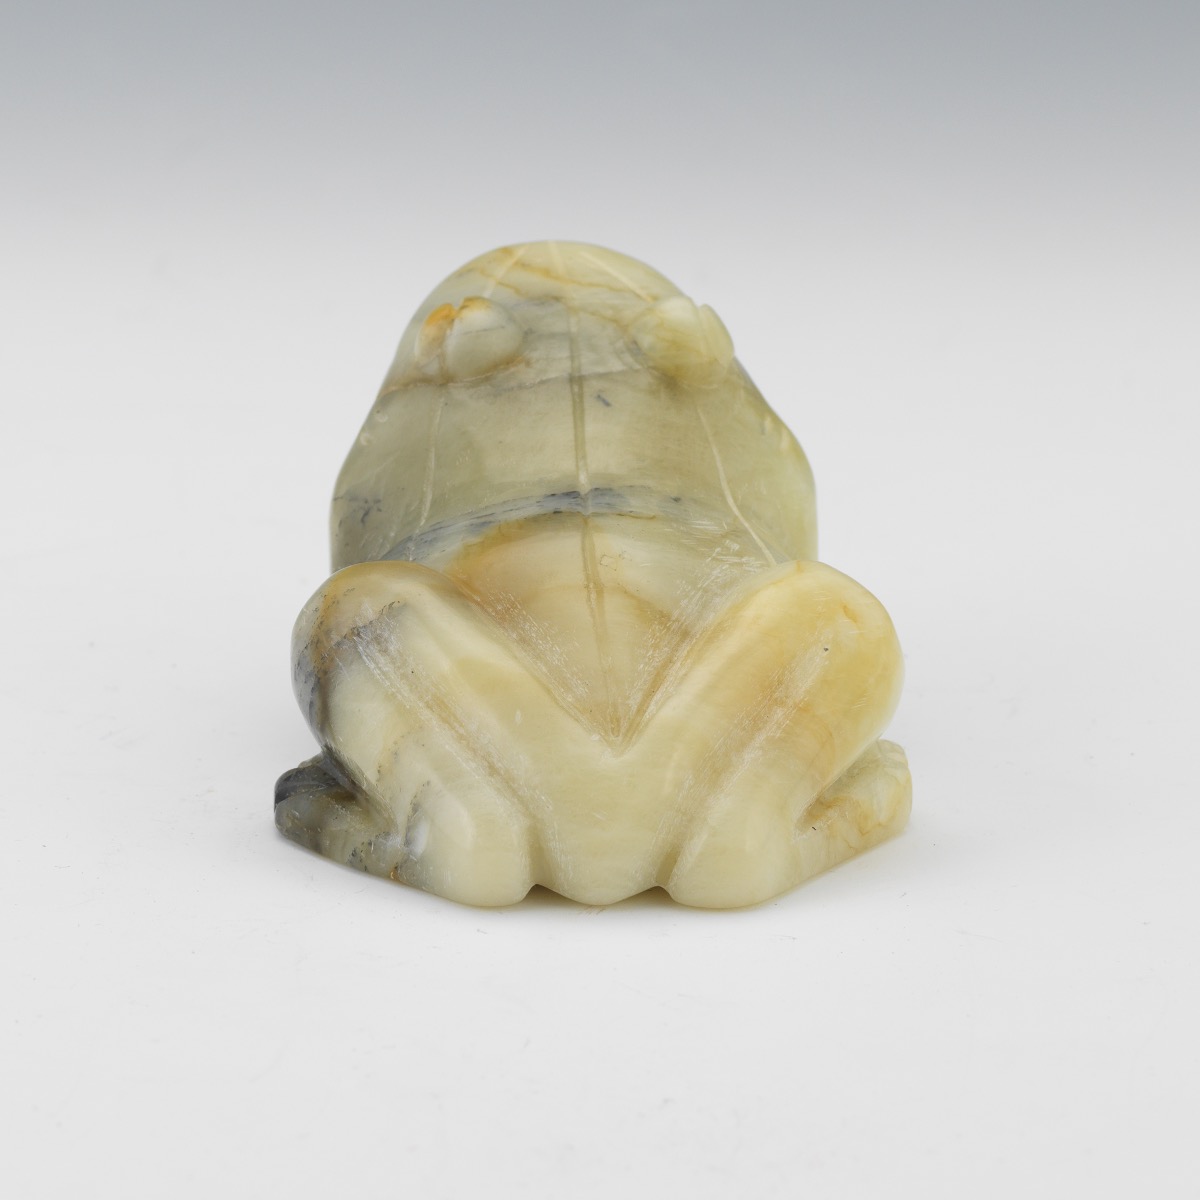 Chinese Carved Agate and Carnelian Lucky Frog Cabinet Sculpture, in Presentation Box - Image 3 of 8